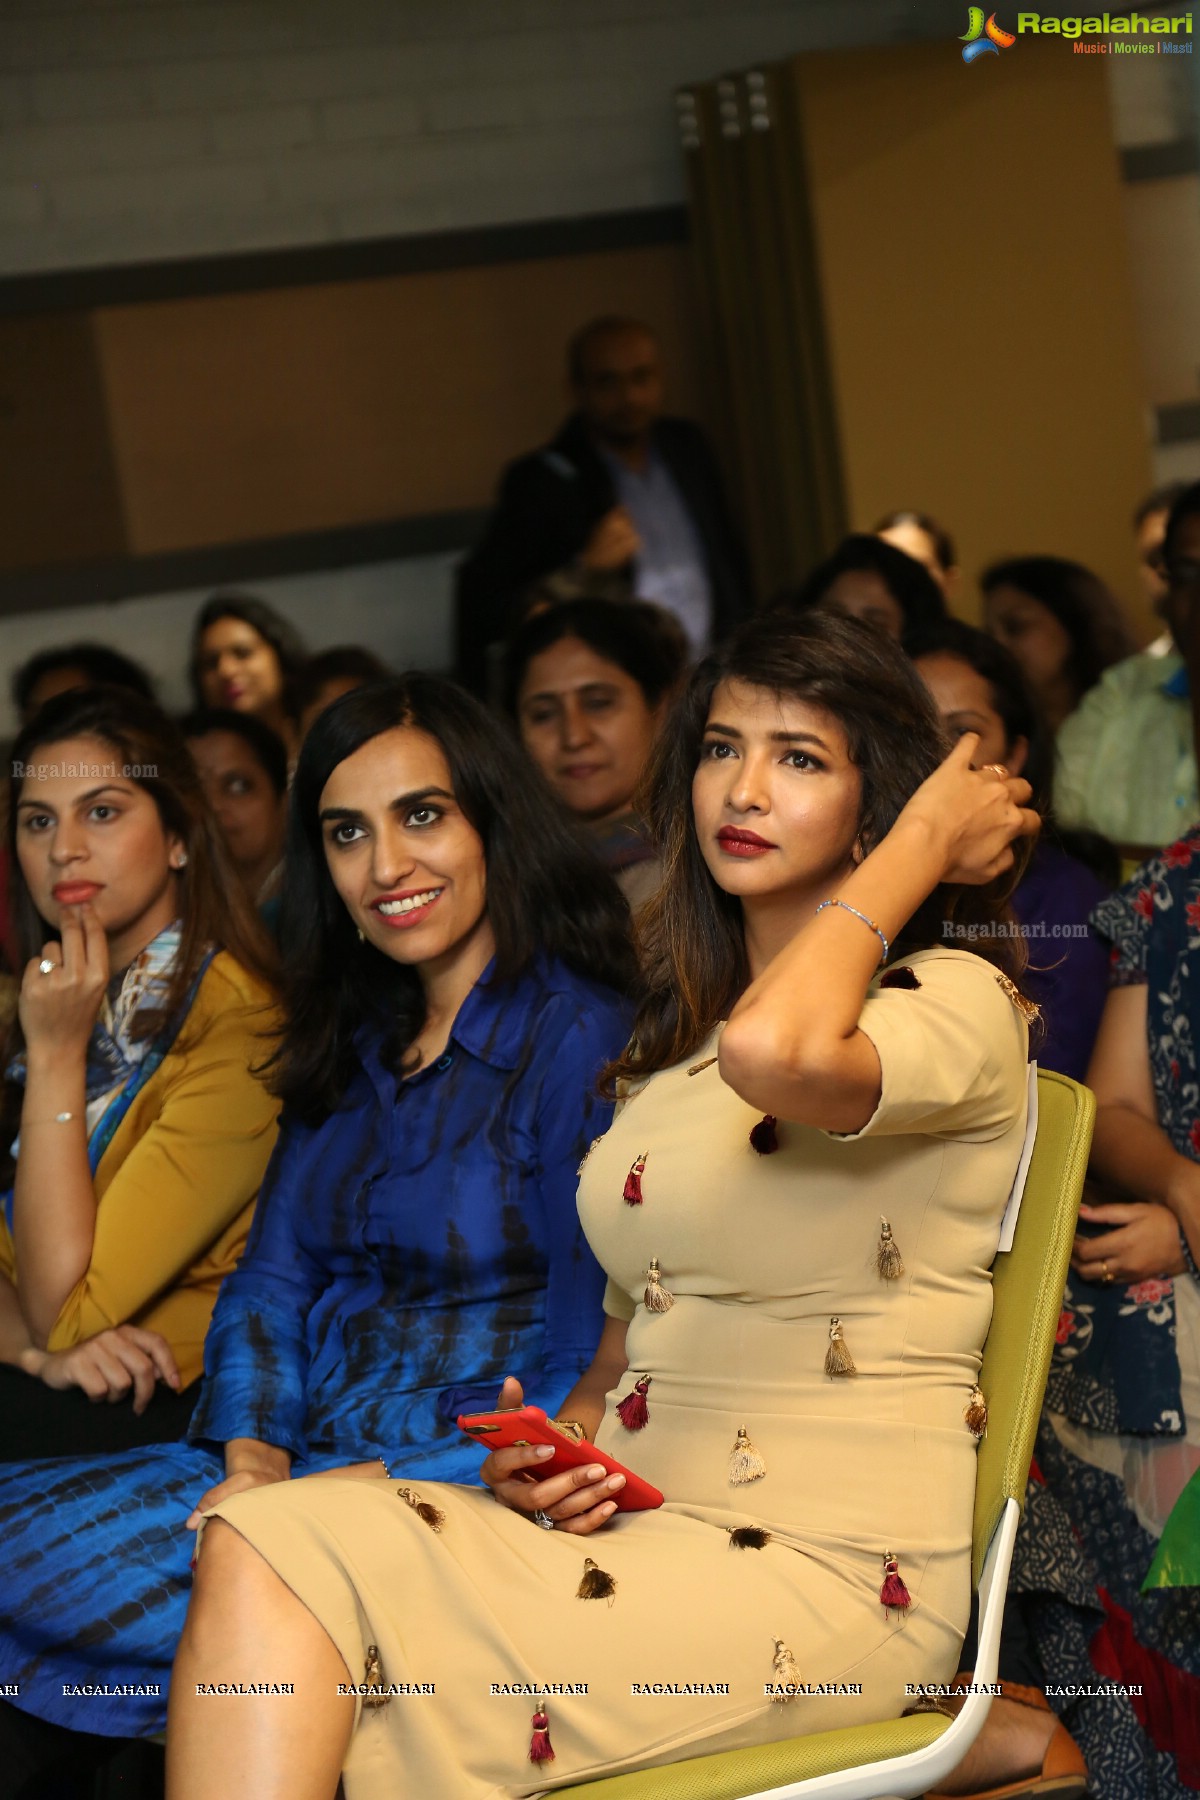 Launch of SWAN - Smart Women Angels Network in India by T Hub at T-Hub, IIIT-H Campus, Gachibowli